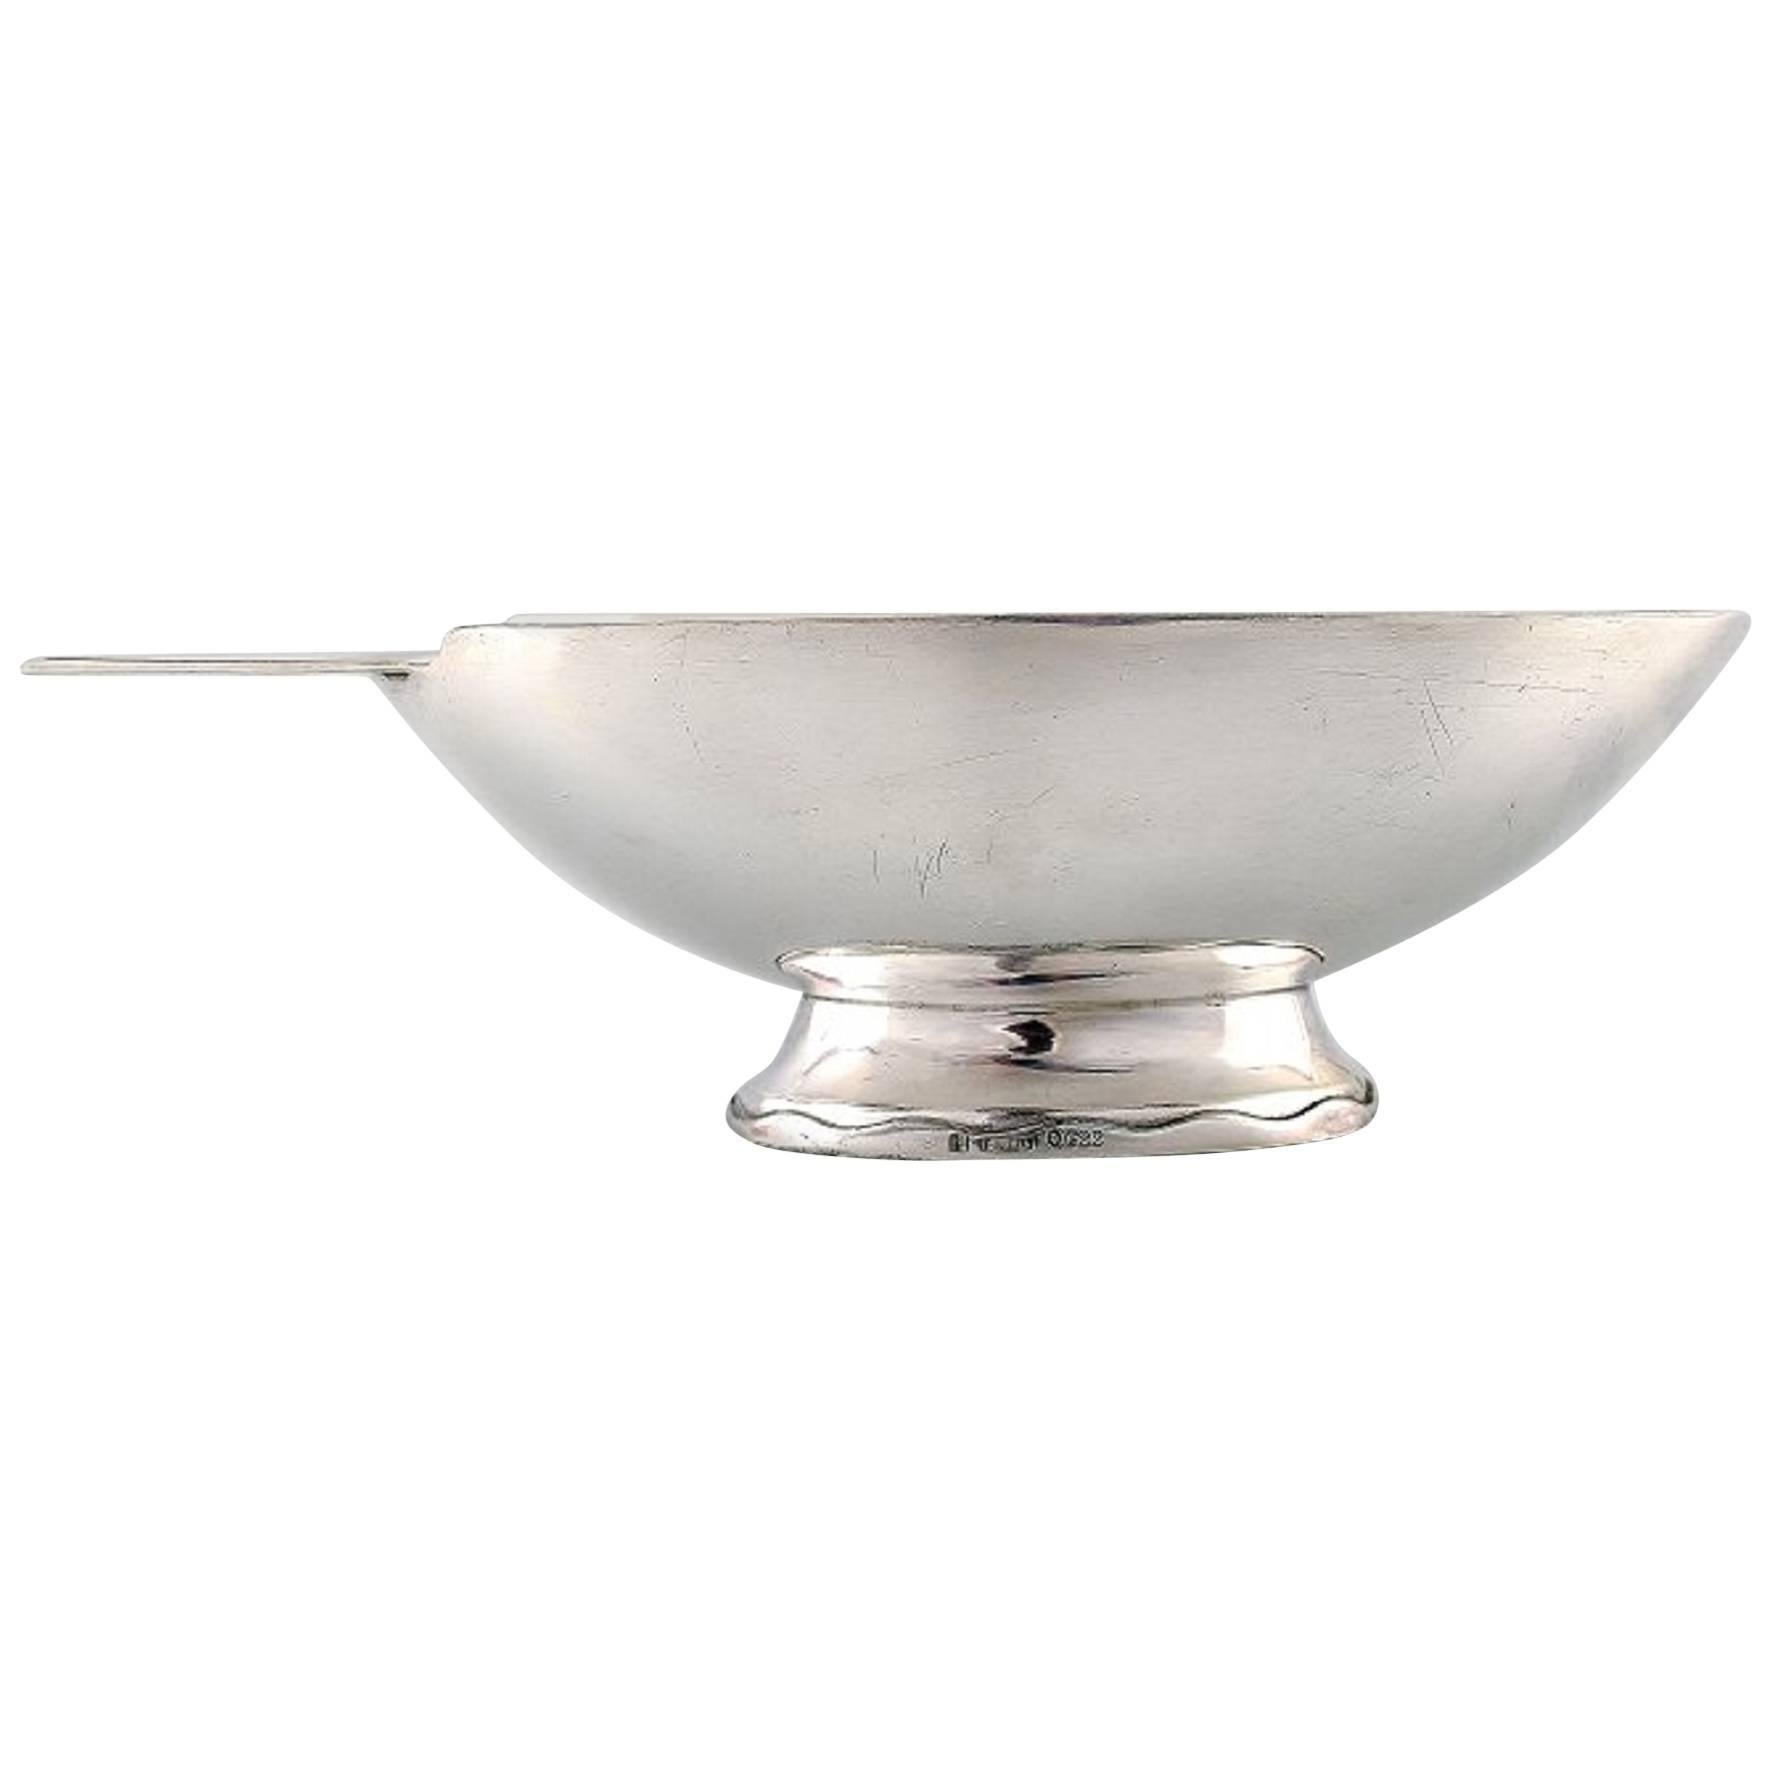 Rare and Fine Silver Plated "Swan" Sauce and Gravy Boat, Christian Fjerdingstad For Sale